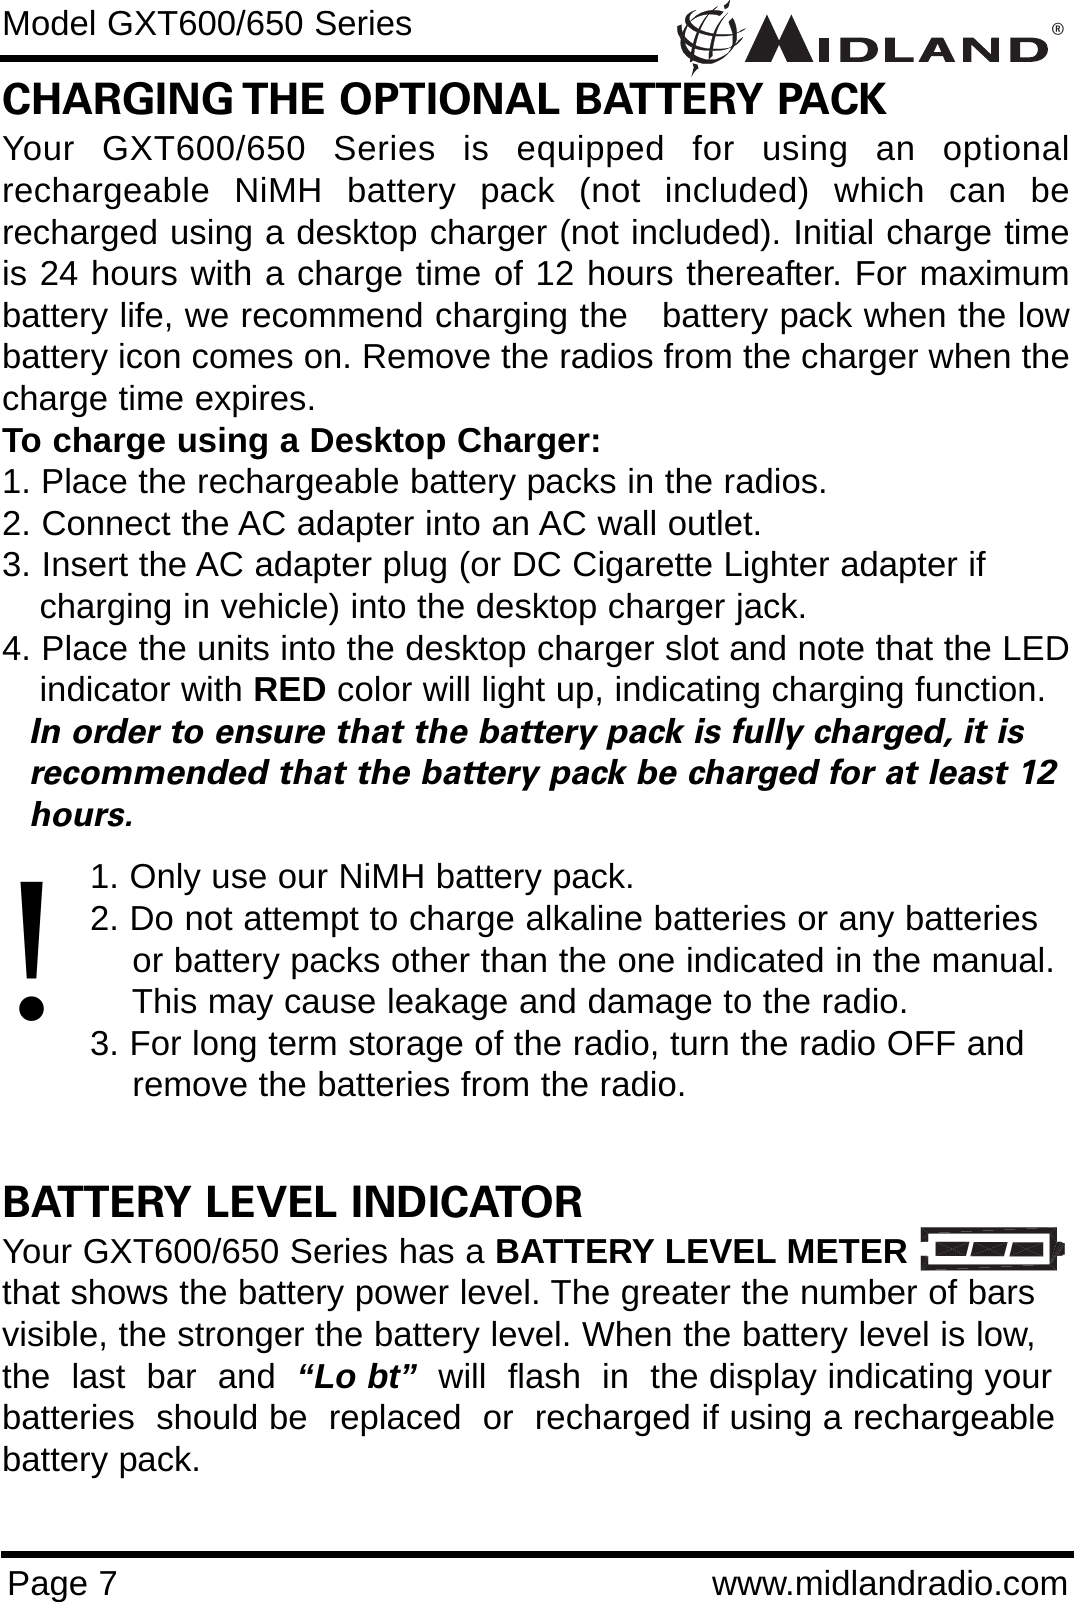 ®Page 7 www.midlandradio.comCHARGING THE OPTIONAL BATTERY PACKYour GXT600/650 Series is equipped for using an optionalrechargeable NiMH battery pack (not included) which can berecharged using a desktop charger (not included). Initial charge timeis 24 hours with a charge time of 12 hours thereafter. For maximumbattery life, we recommend charging the   battery pack when the lowbattery icon comes on. Remove the radios from the charger when thecharge time expires.To charge using a Desktop Charger:1. Place the rechargeable battery packs in the radios.2. Connect the AC adapter into an AC wall outlet.3. Insert the AC adapter plug (or DC Cigarette Lighter adapter if    charging in vehicle) into the desktop charger jack.4. Place the units into the desktop charger slot and note that the LEDindicator with RED color will light up, indicating charging function. In order to ensure that the battery pack is fully charged, it is  recommended that the battery pack be charged for at least 12 hours.1. Only use our NiMH battery pack.2. Do not attempt to charge alkaline batteries or any batteries or battery packs other than the one indicated in the manual. This may cause leakage and damage to the radio.3. For long term storage of the radio, turn the radio OFF and remove the batteries from the radio.BATTERY LEVEL INDICATORYour GXT600/650 Series has a BATTERY LEVEL METERthat shows the battery power level. The greater the number of barsvisible, the stronger the battery level. When the battery level is low,the  last  bar  and  “Lo bt” will  flash  in  the display indicating yourbatteries  should be  replaced  or  recharged if using a rechargeablebattery pack.Model GXT600/650 Series!